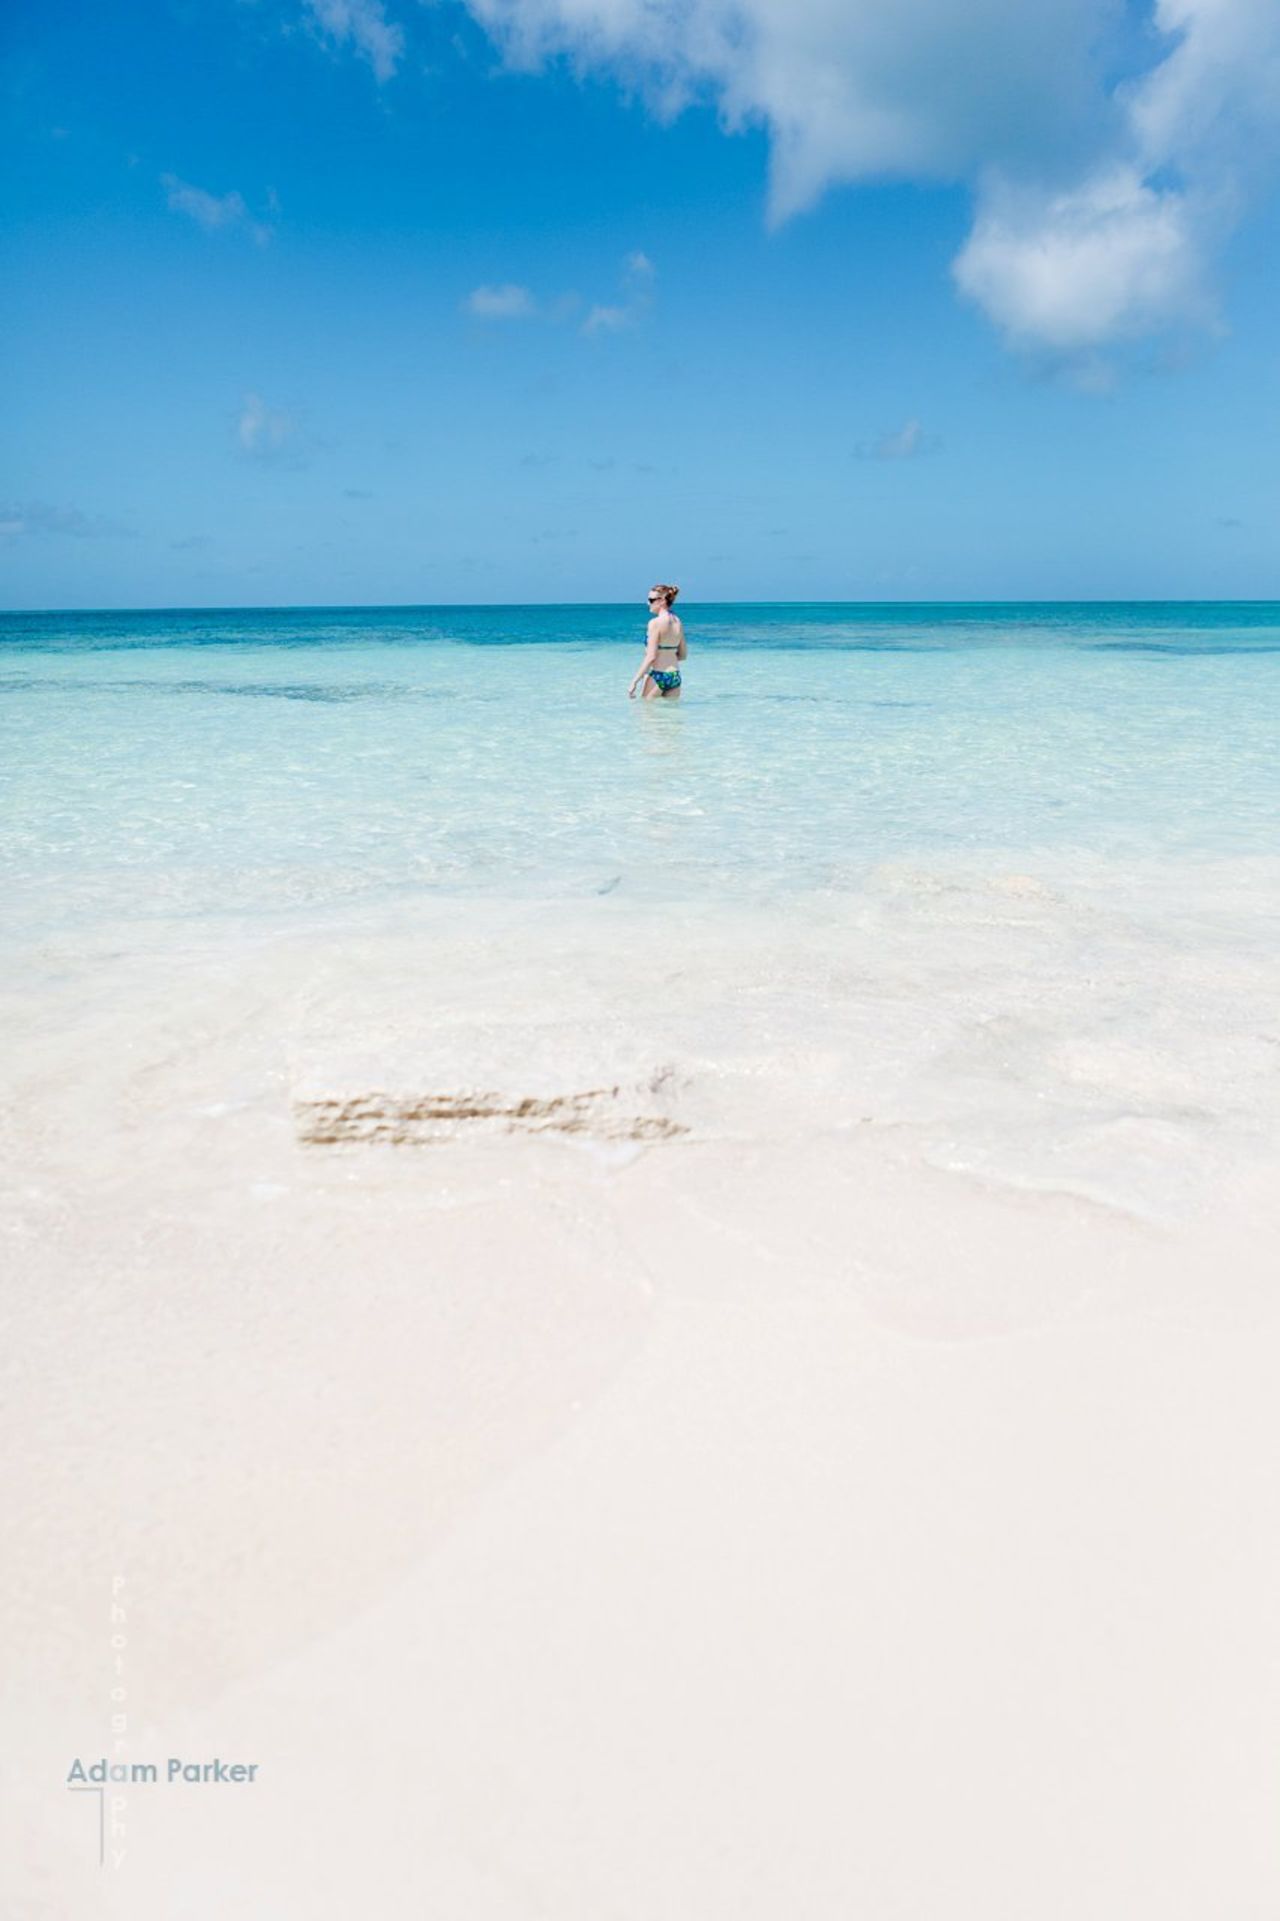 <a href="http://ireport.cnn.com/docs/DOC-814059">CNN iReporter Adam Parker's honeymoon</a> with his wife to the twin islands of Antigua and Barbuda was certainly beautiful, but he says the heat, humidity and sand flies made vacationing miserable. "I think we need some of the memories to fade before we go back," he says.